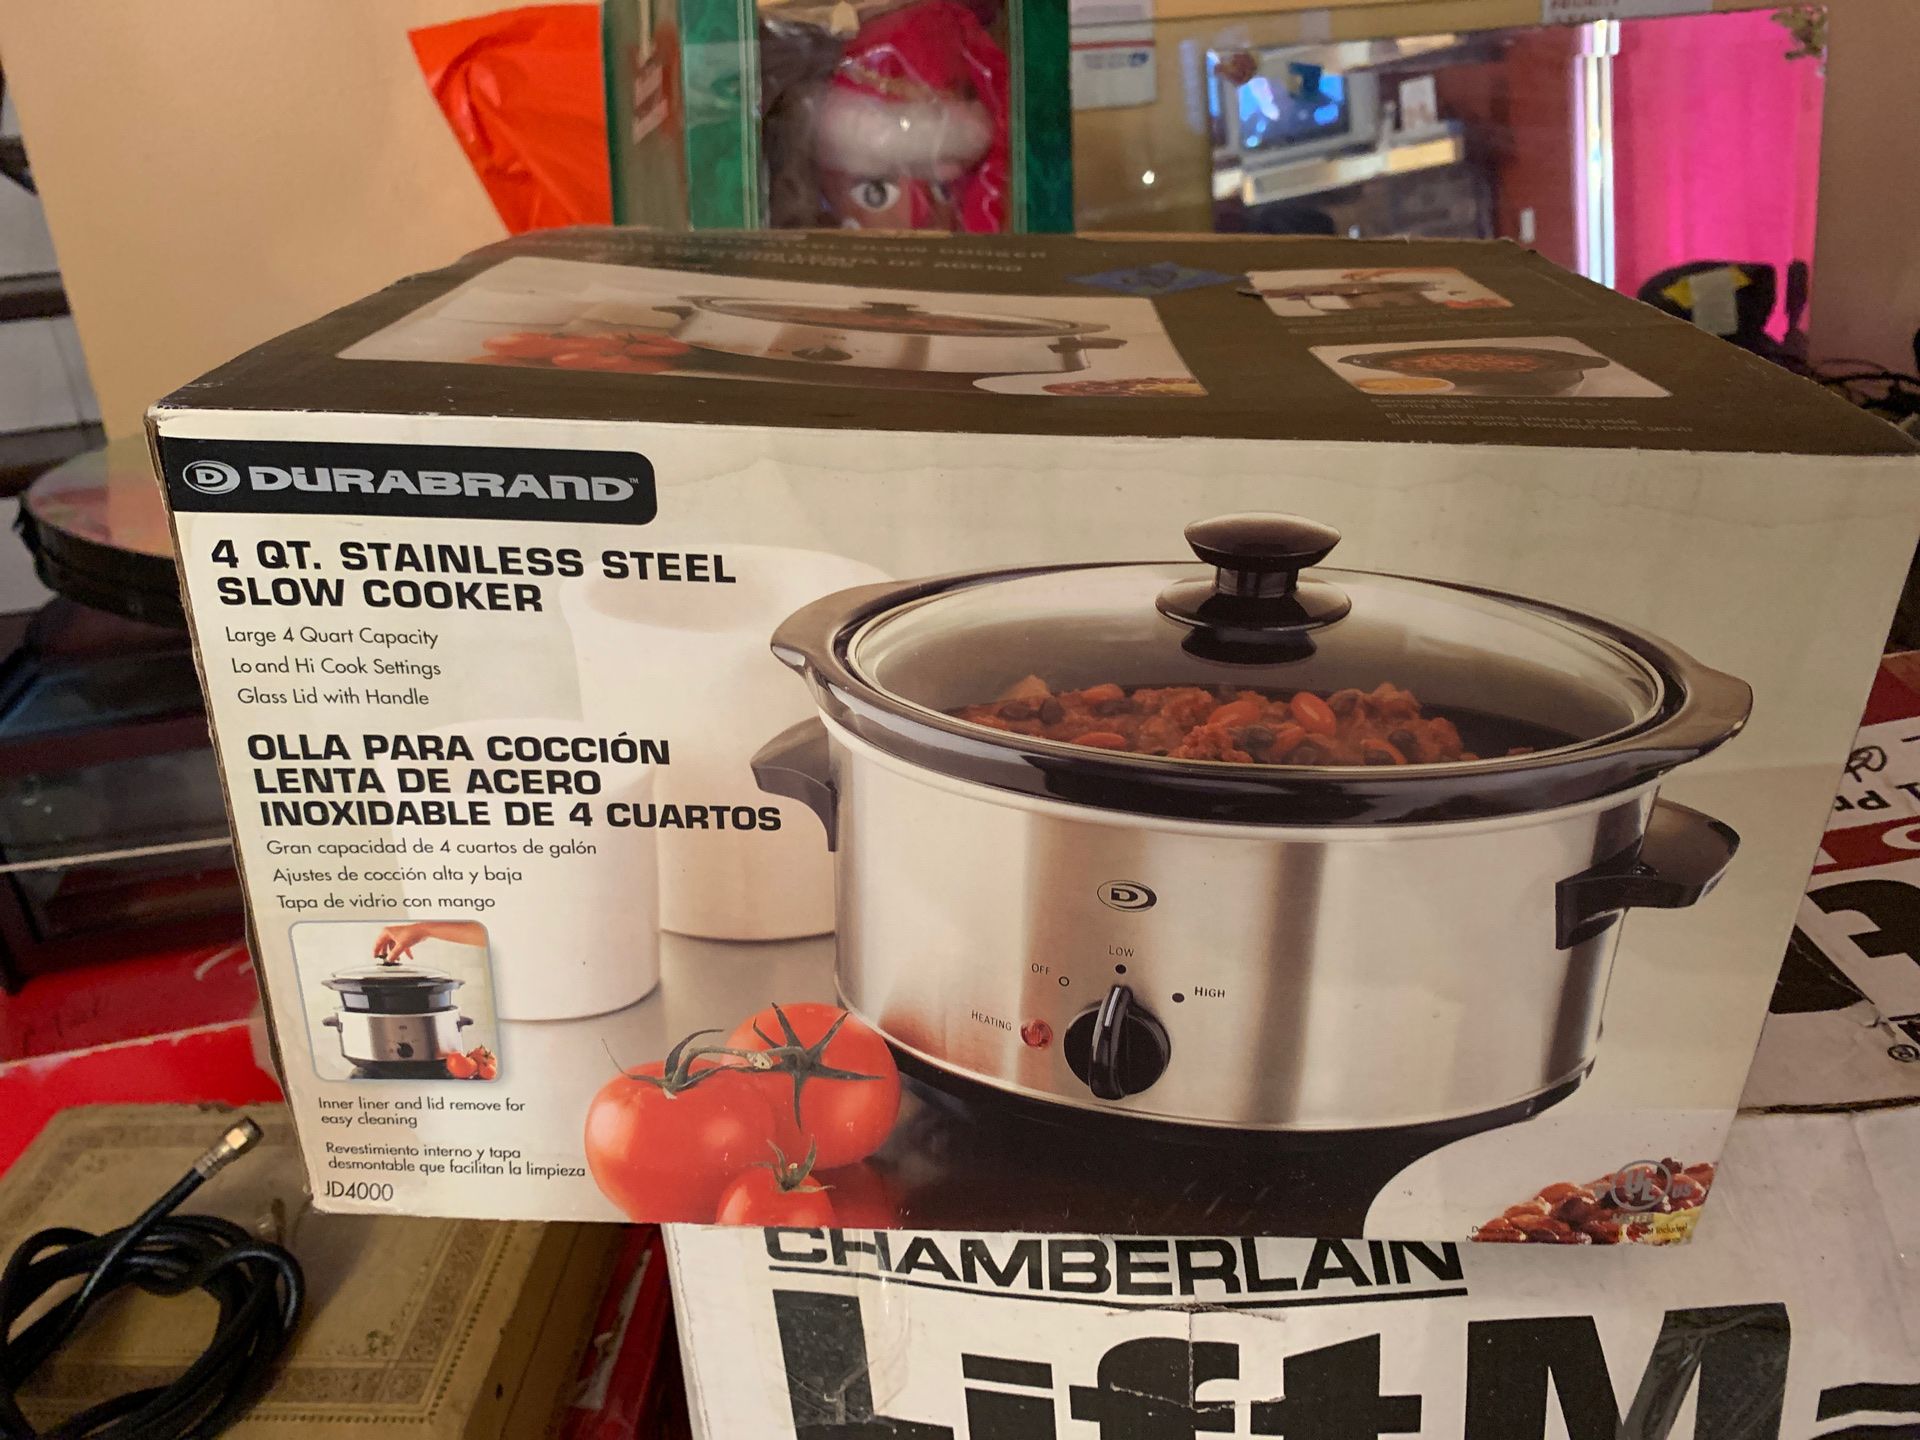 Durabrand stainless steel slow cooker